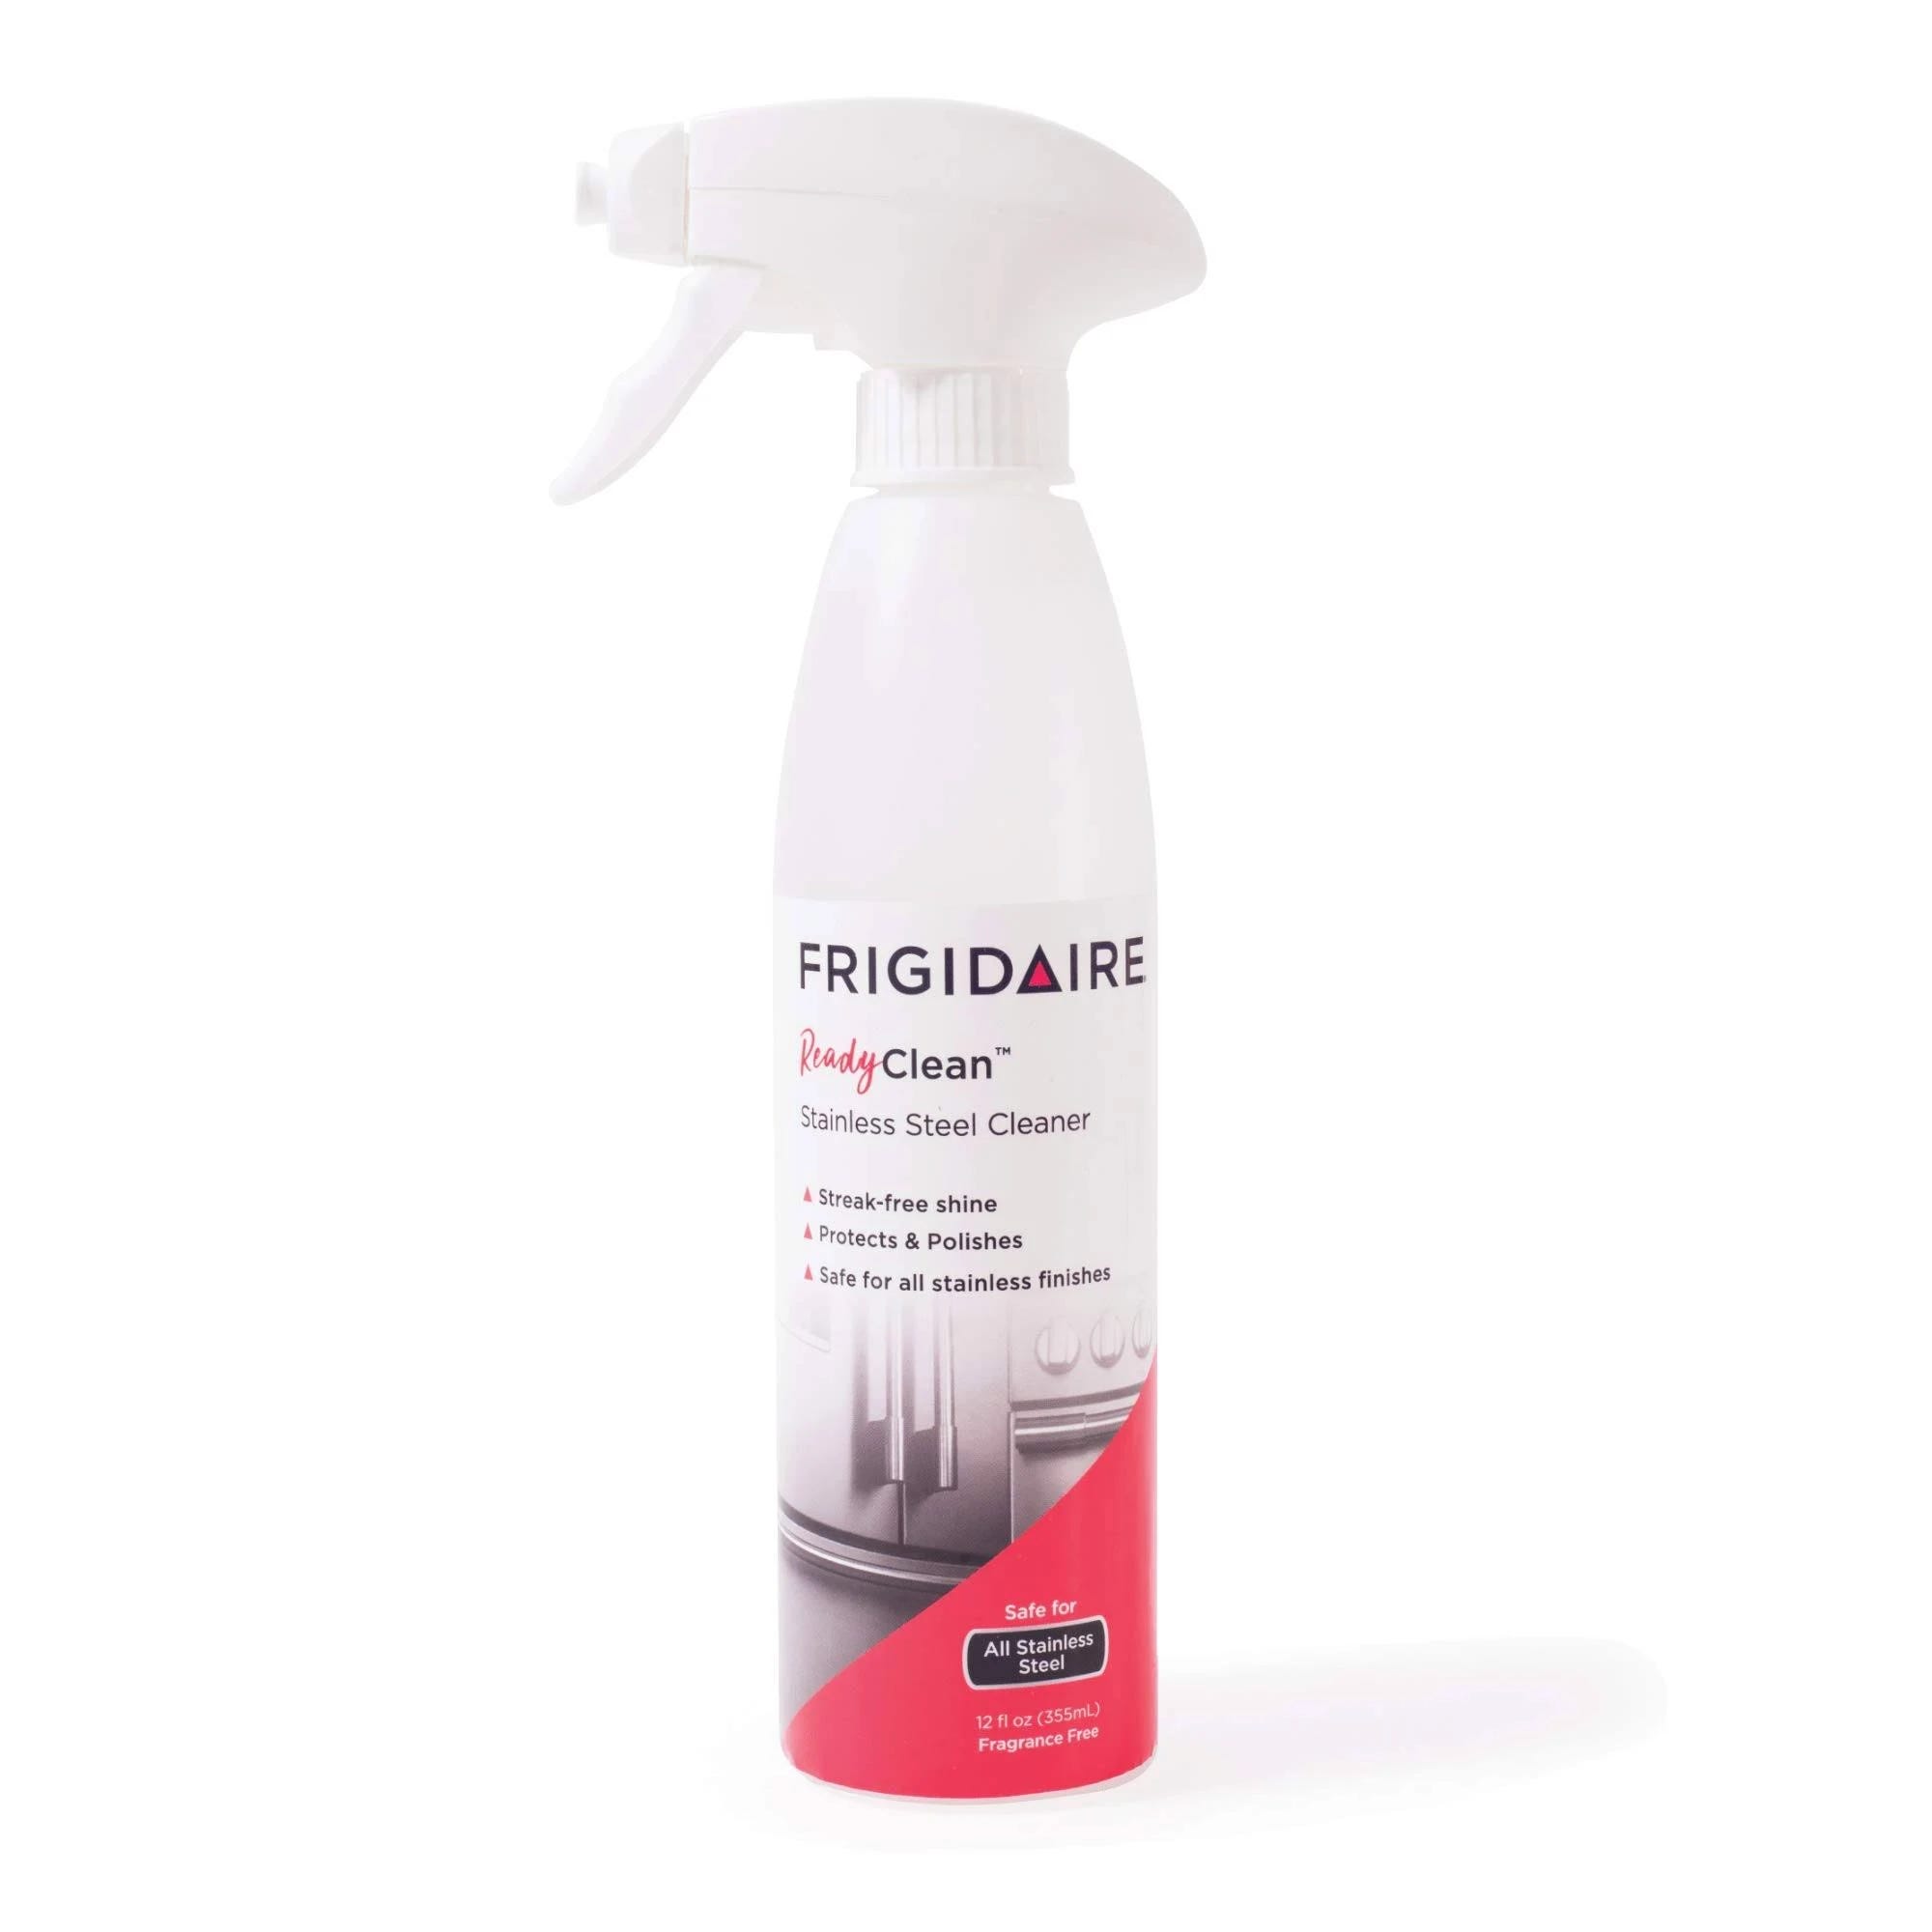 Frigidaire ReadyClean Stainless Steel Cleaner | Image